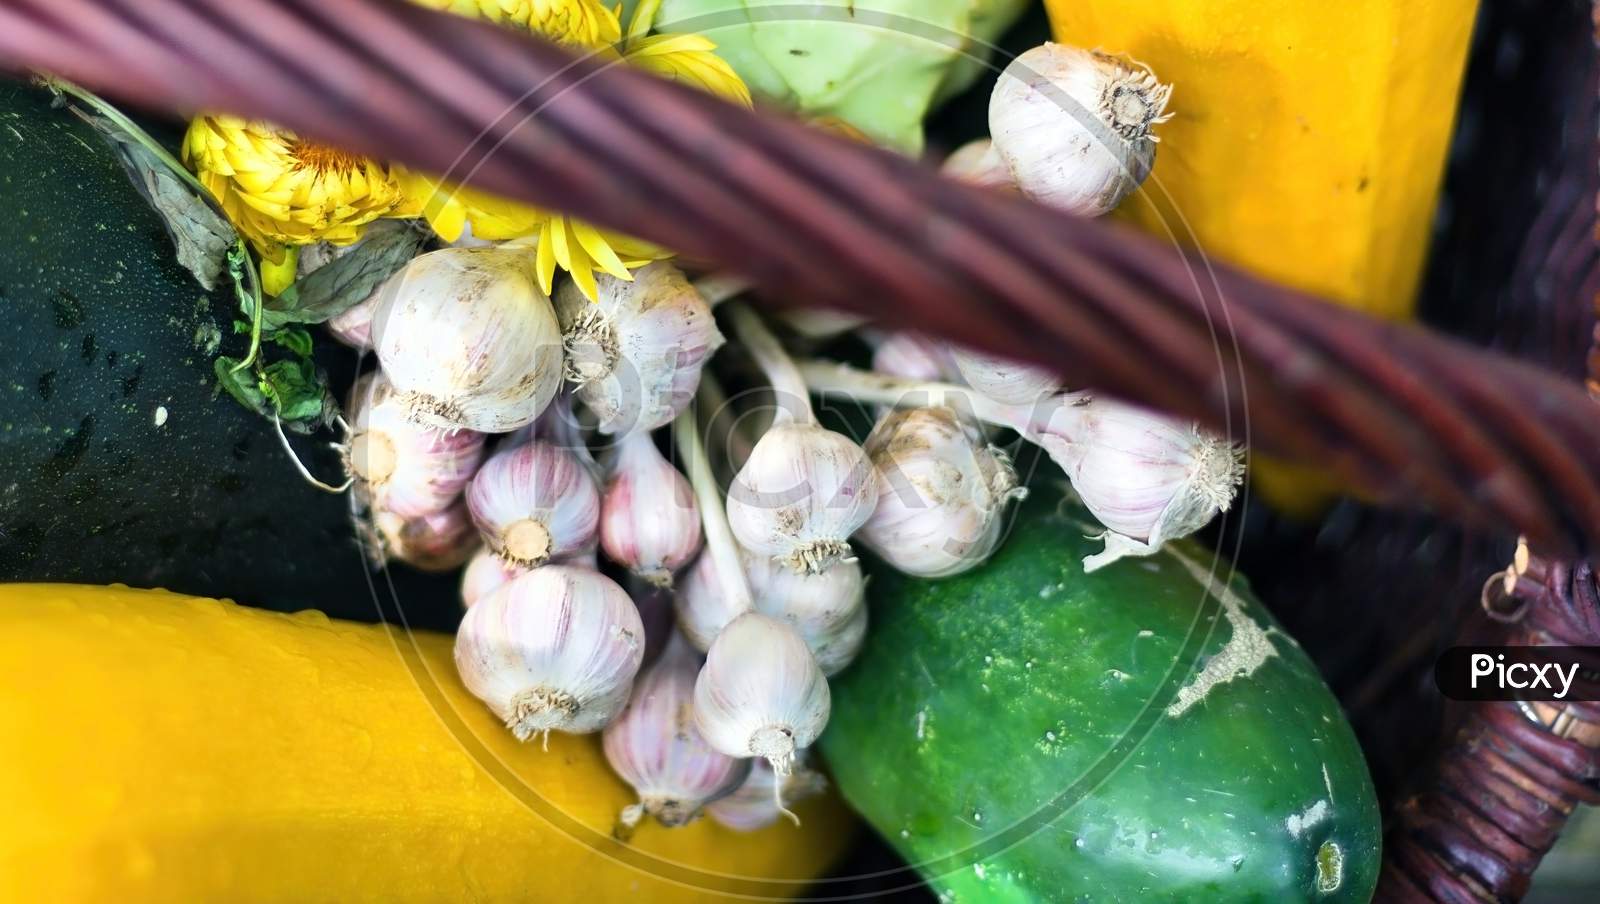 Close Up Of A Bunch Of Garlic And Cucumber With Other Vegetables In A Basket. Gardening And Vegetables Collection Concept